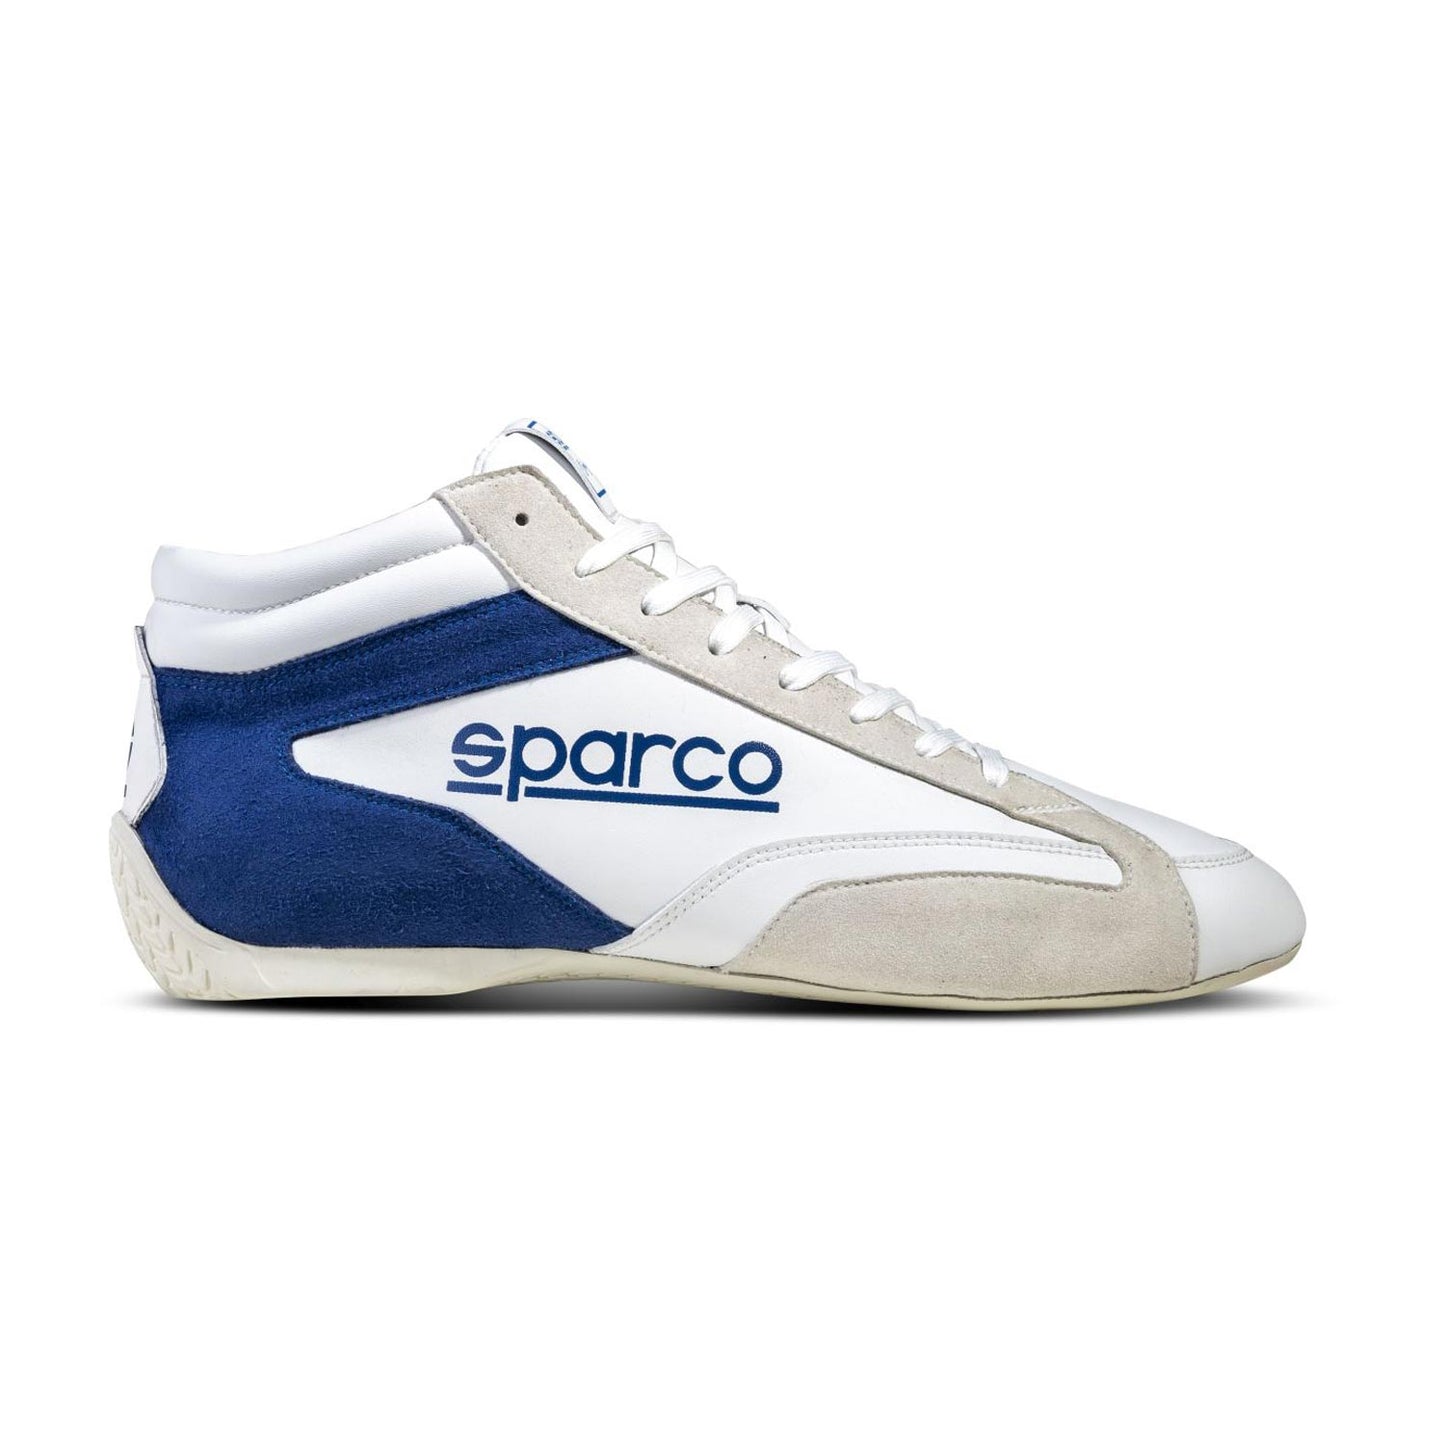 Sparco S-DRIVE MID Shoes